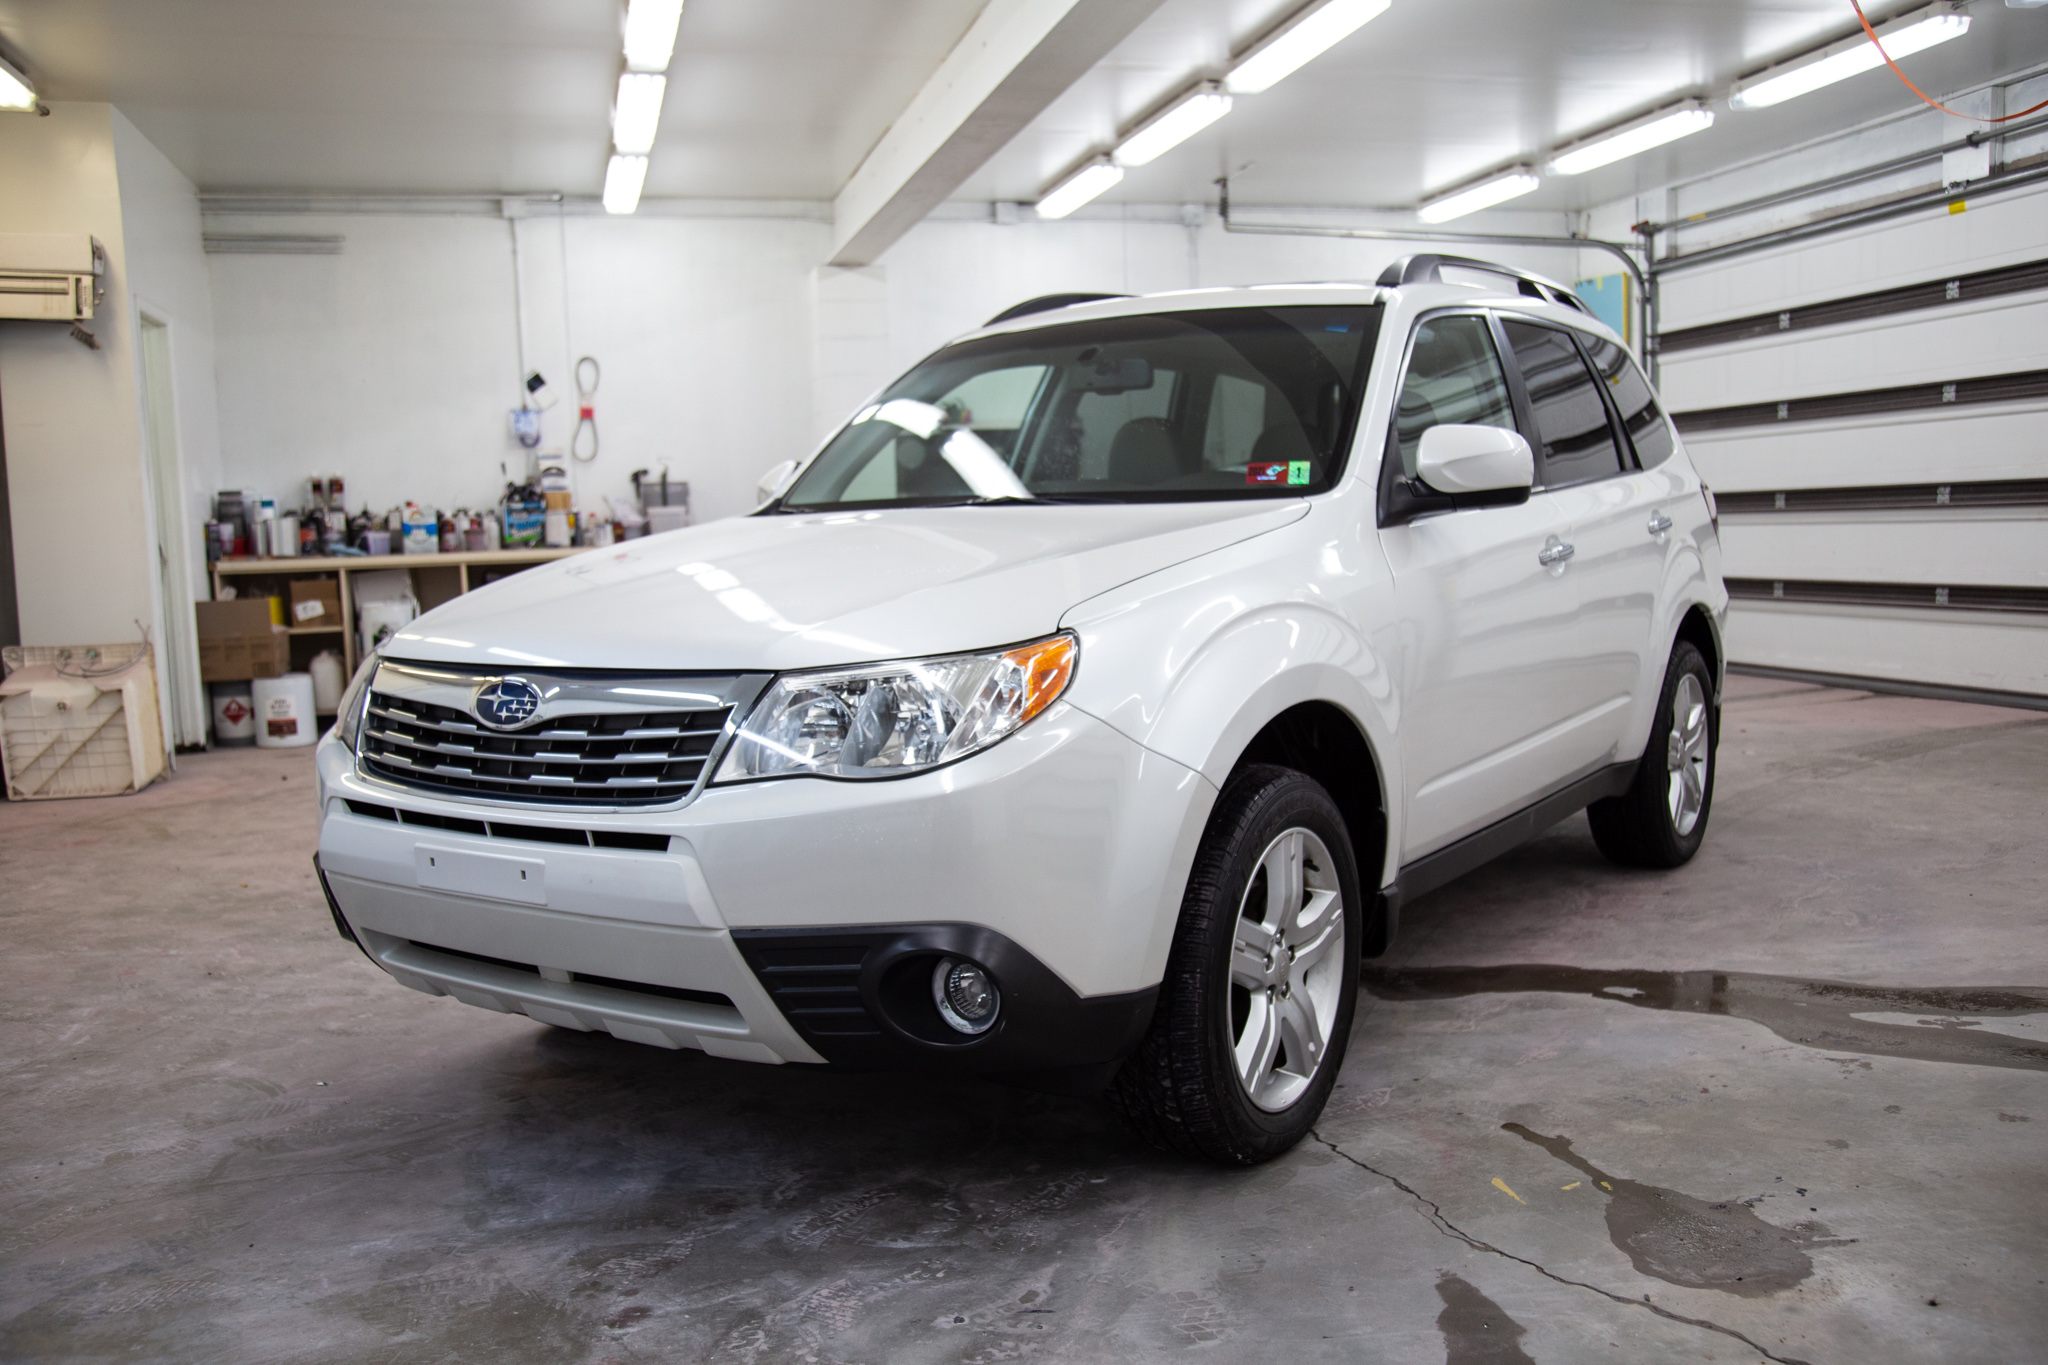 You are currently viewing 2010 Subaru Forester 2.5 Premium